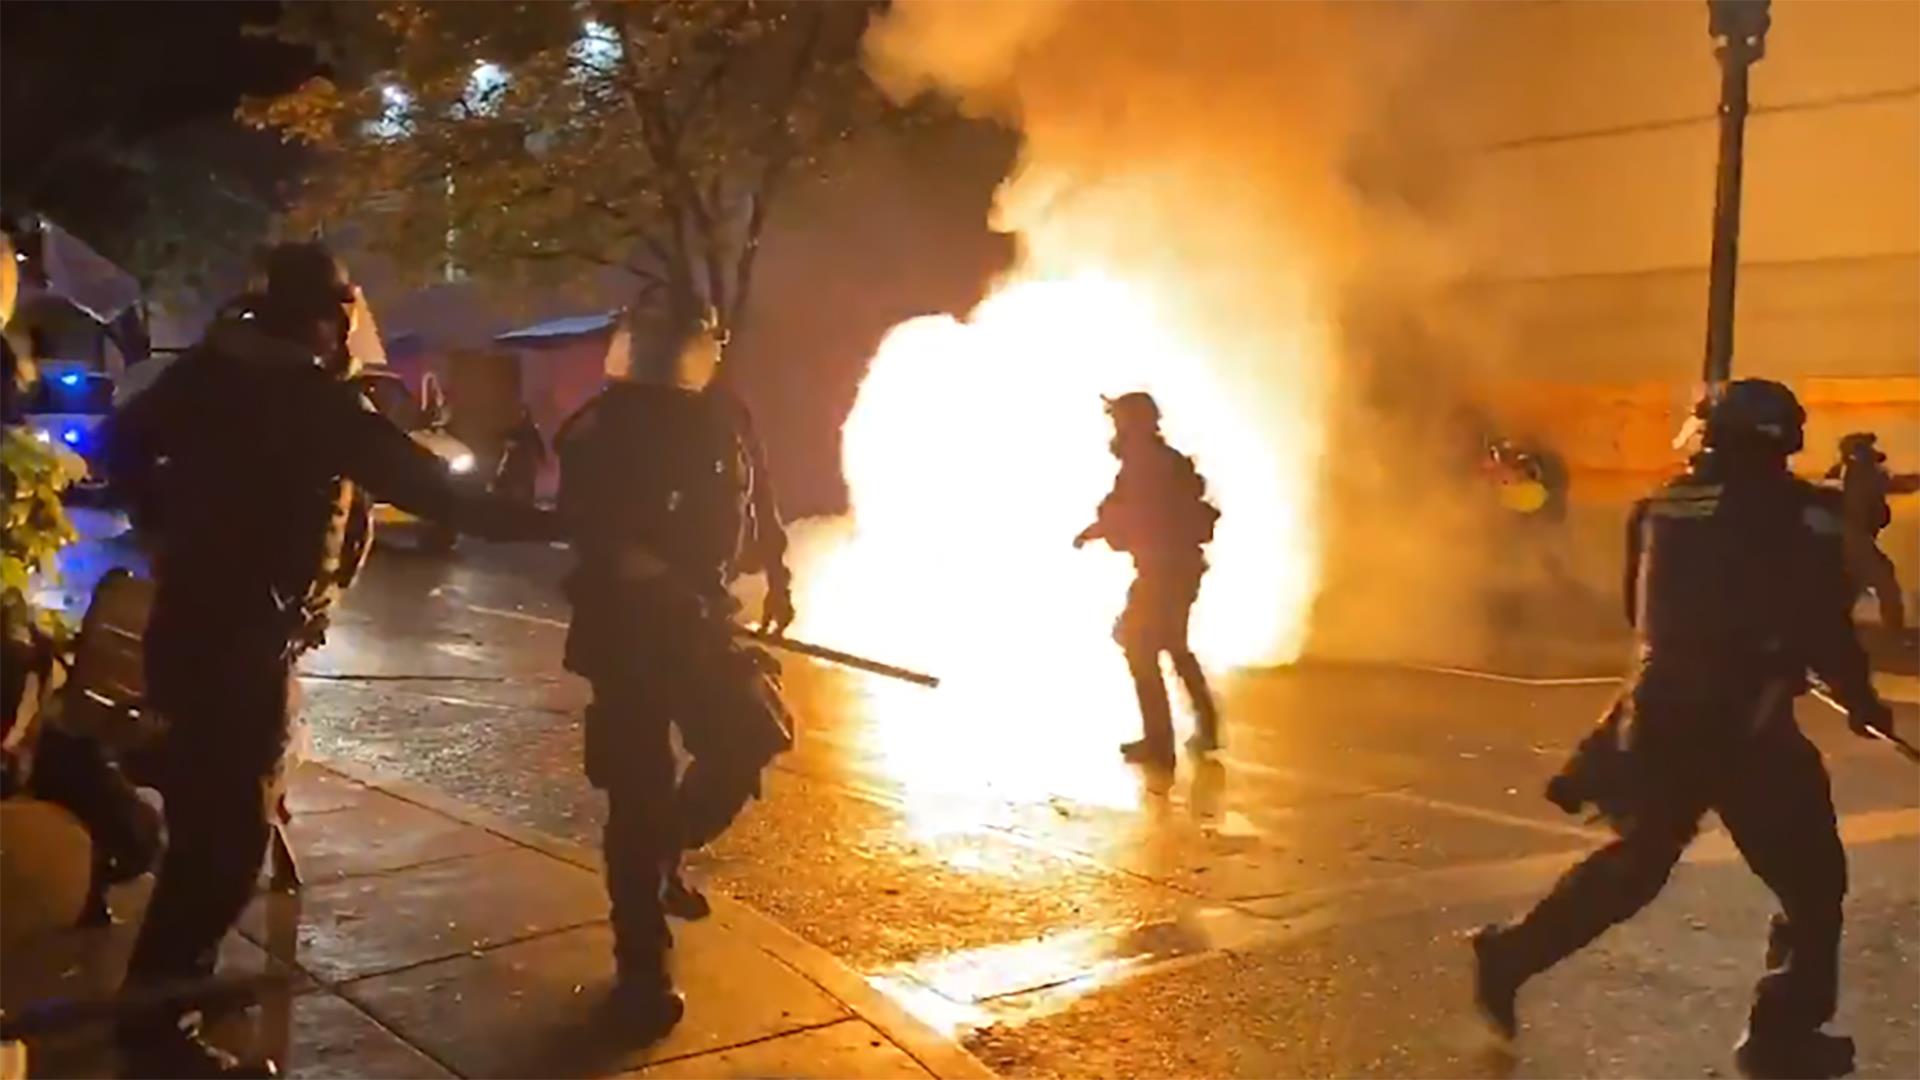 Watch: Molotov cocktails are thrown at police officers in Portland protests